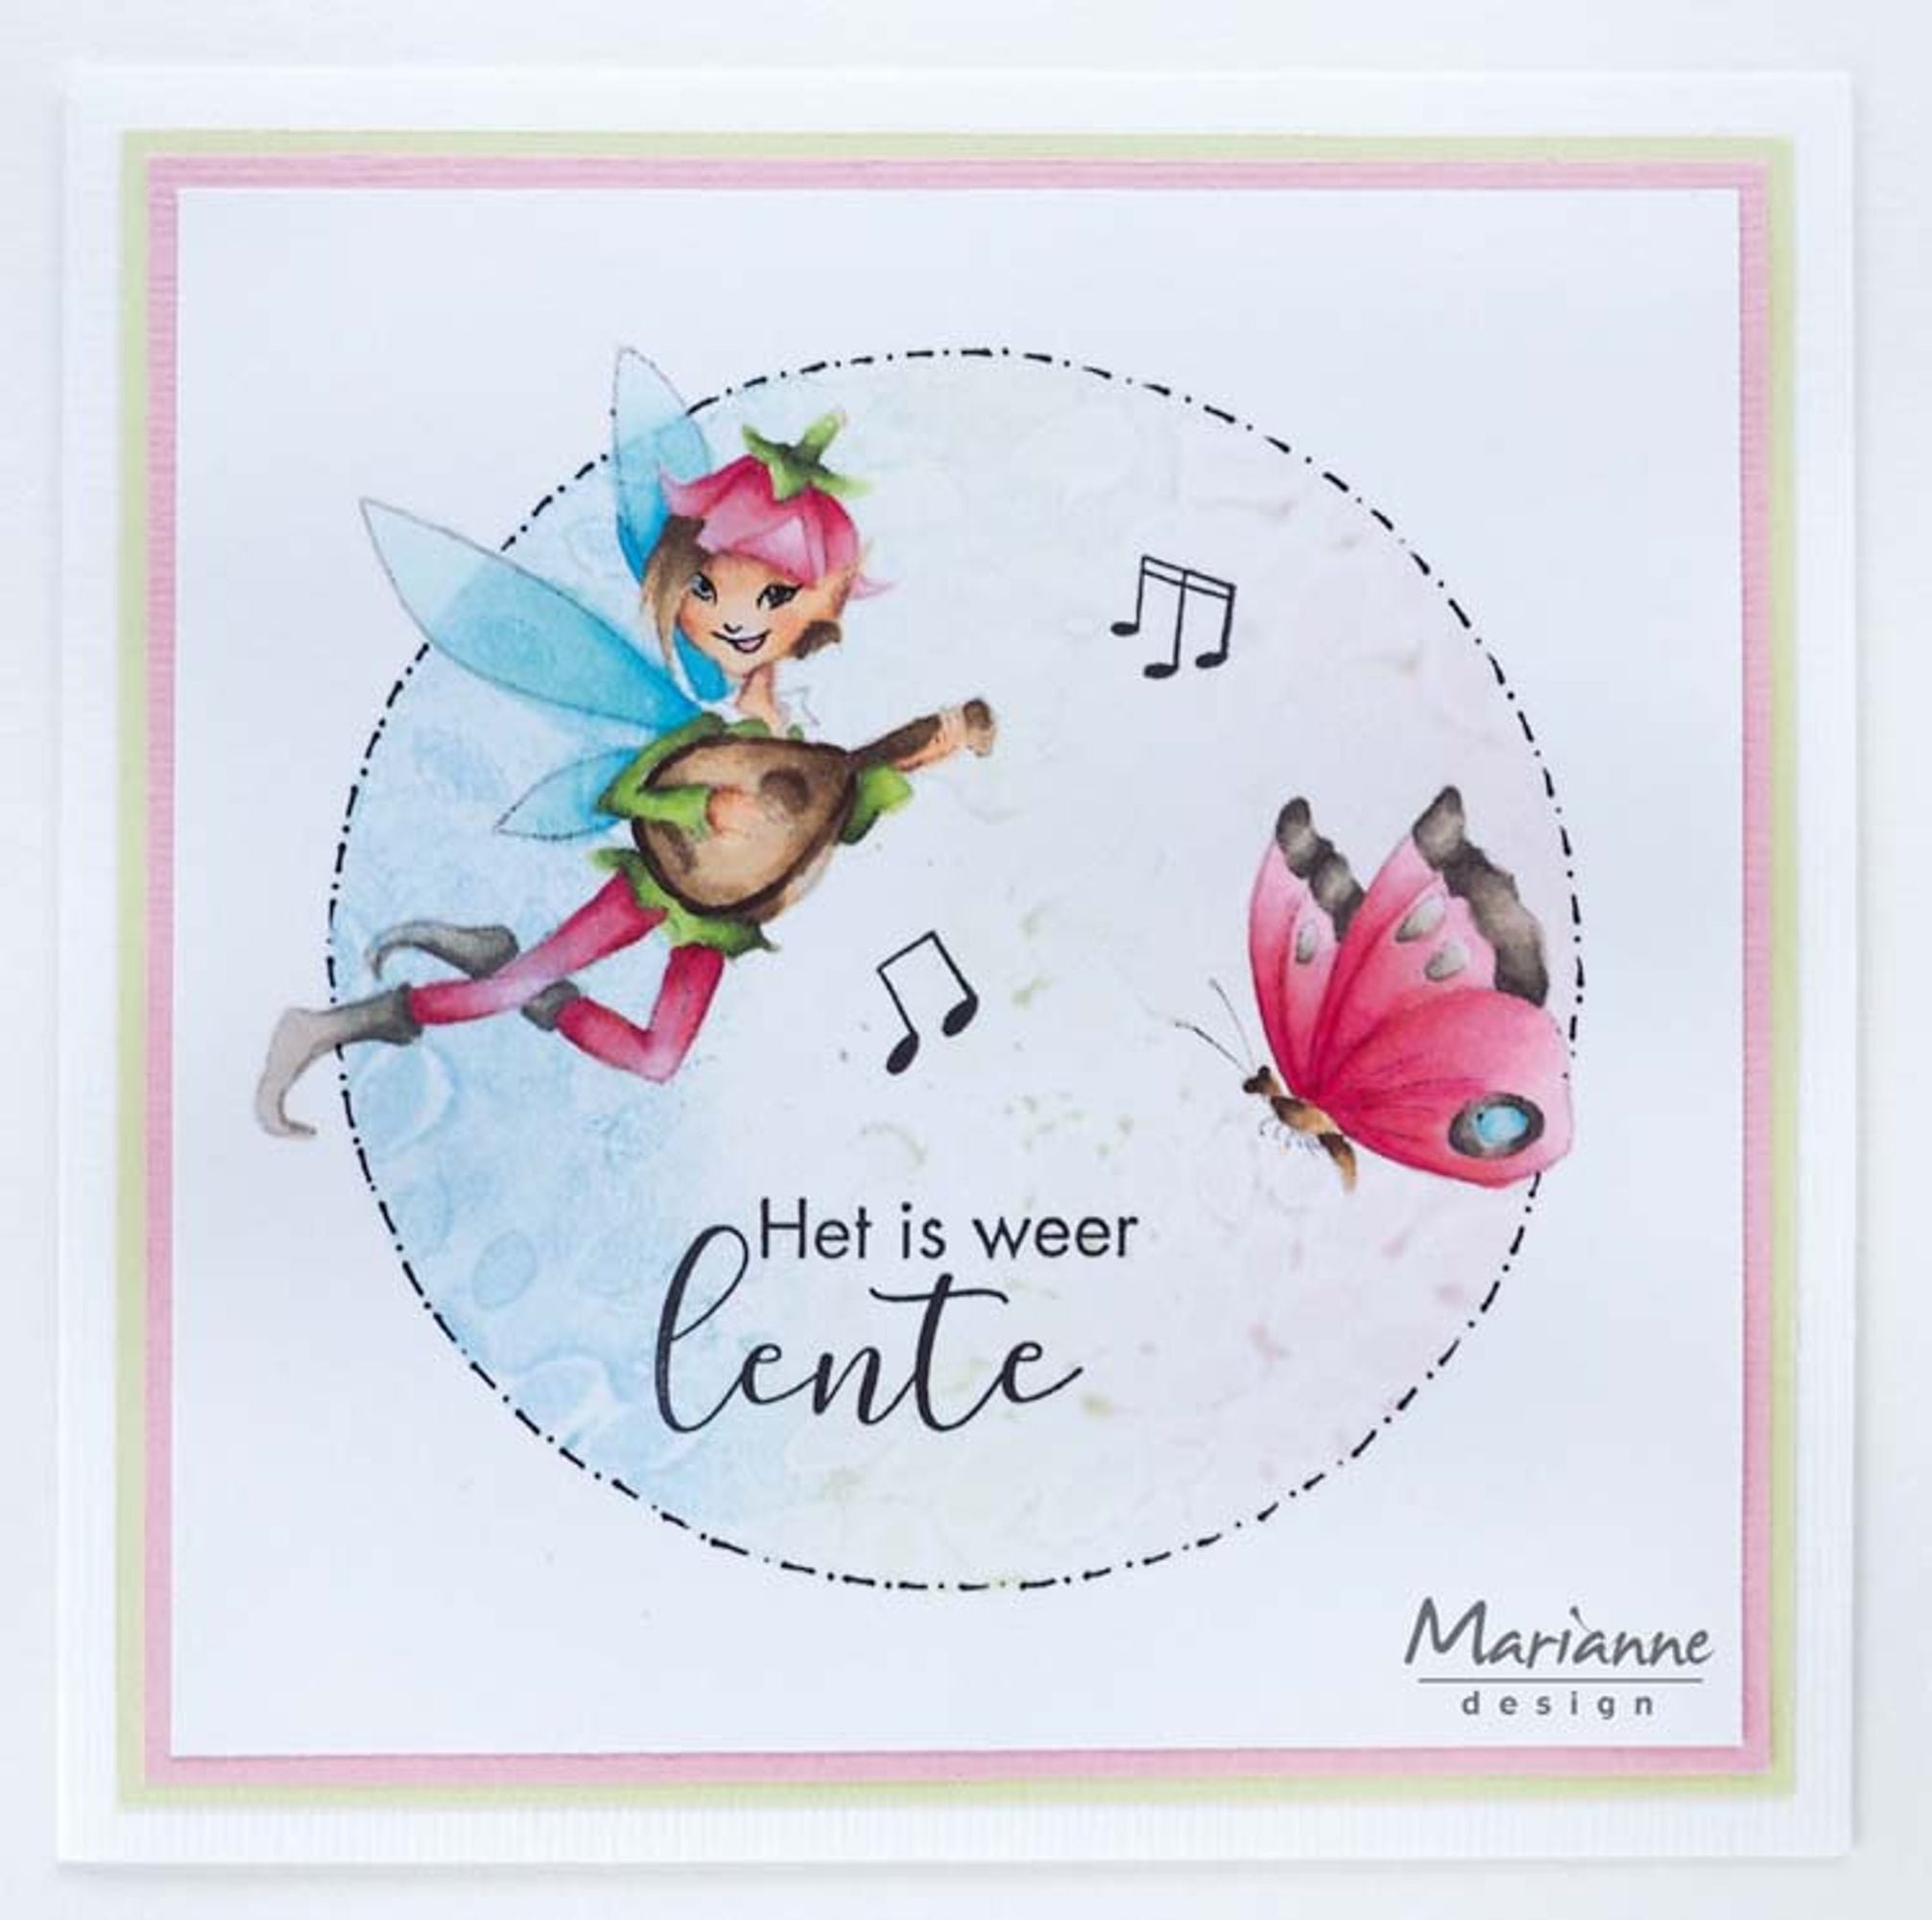 Marianne Design Stamps Hetty's Musical Fairy